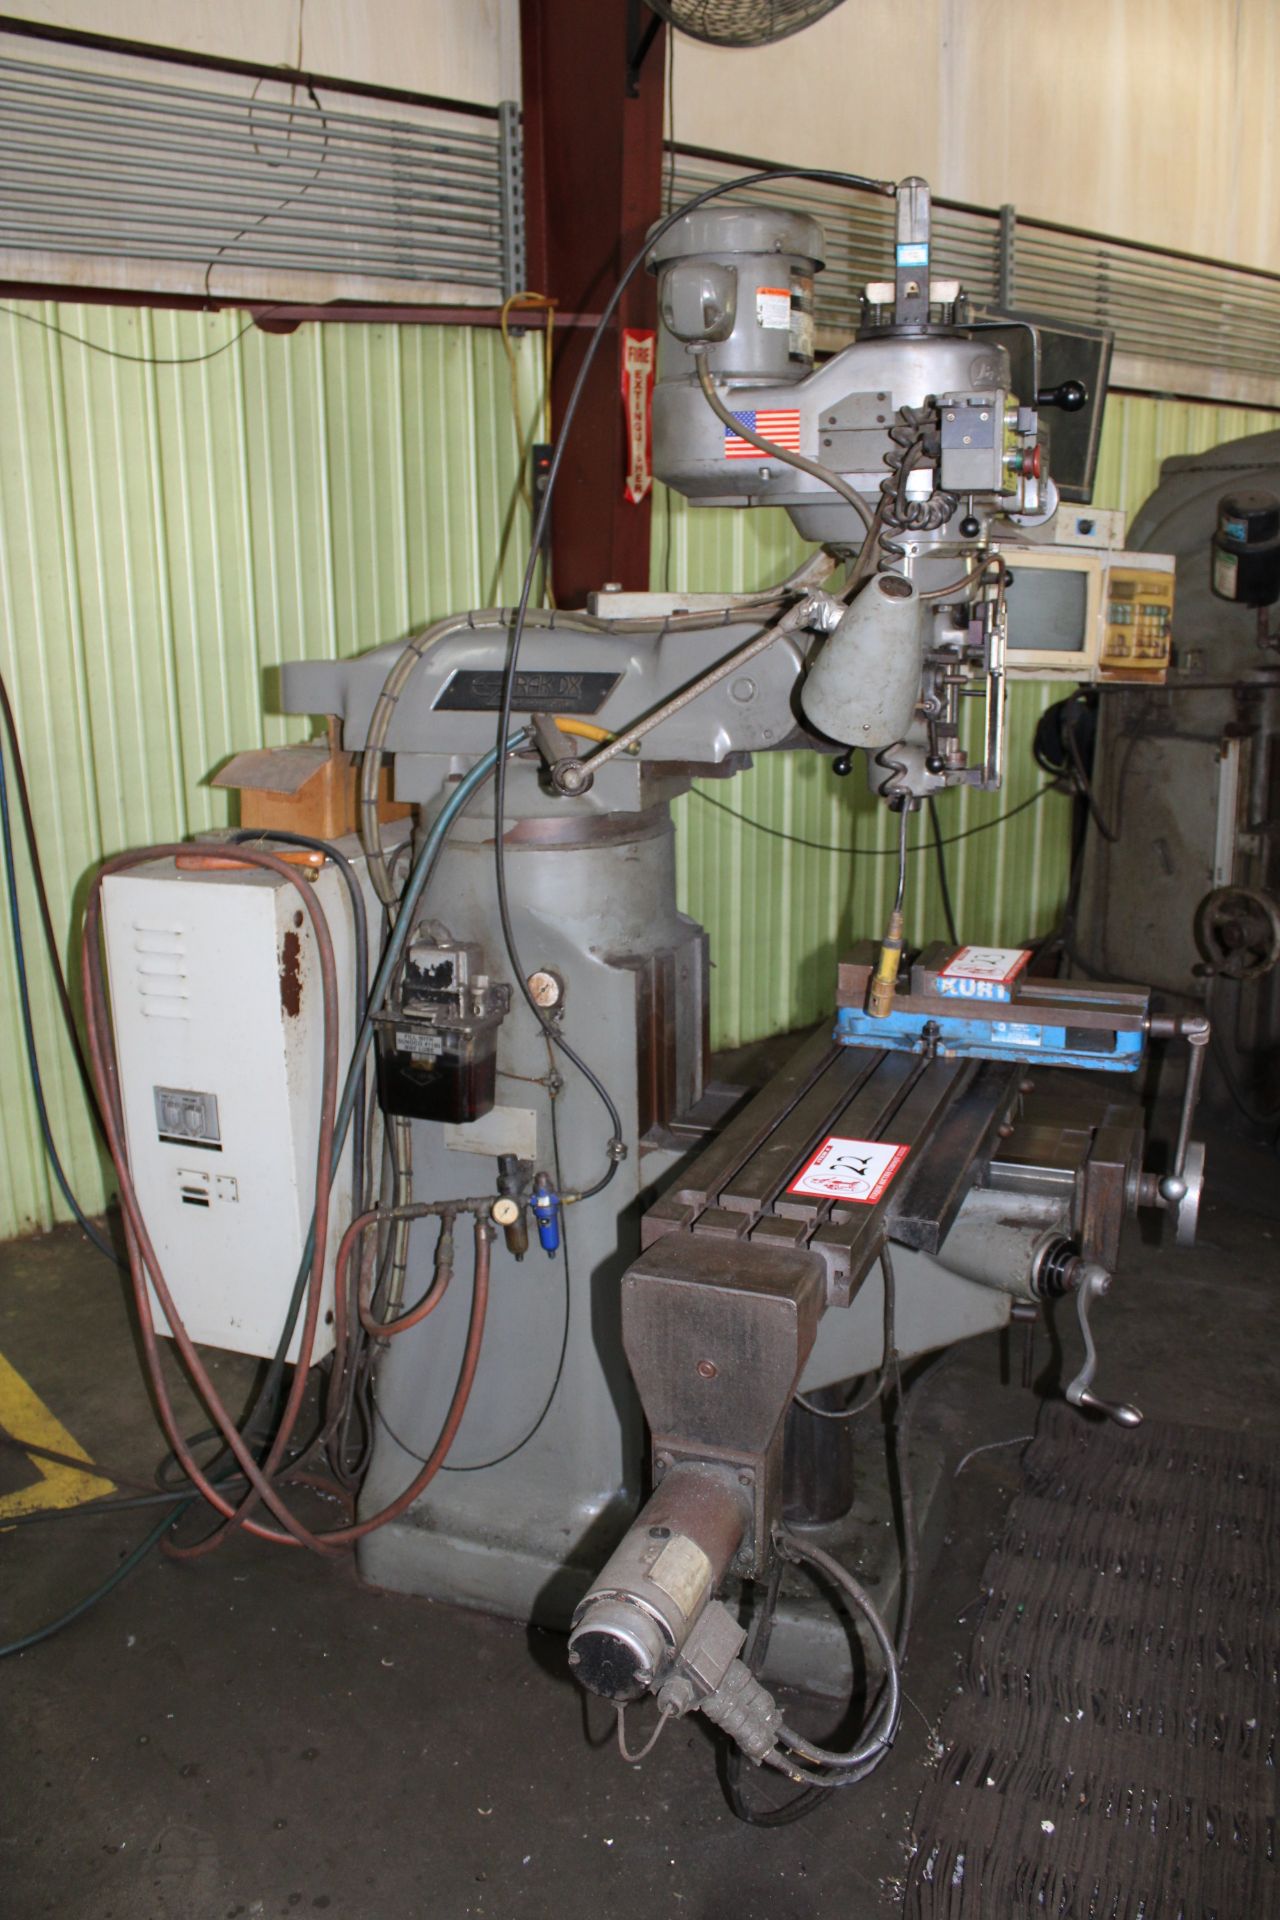 Bridgeport Vertical Mill w/ XY Axis and Bridgeport Easy Track Controls - Image 2 of 4